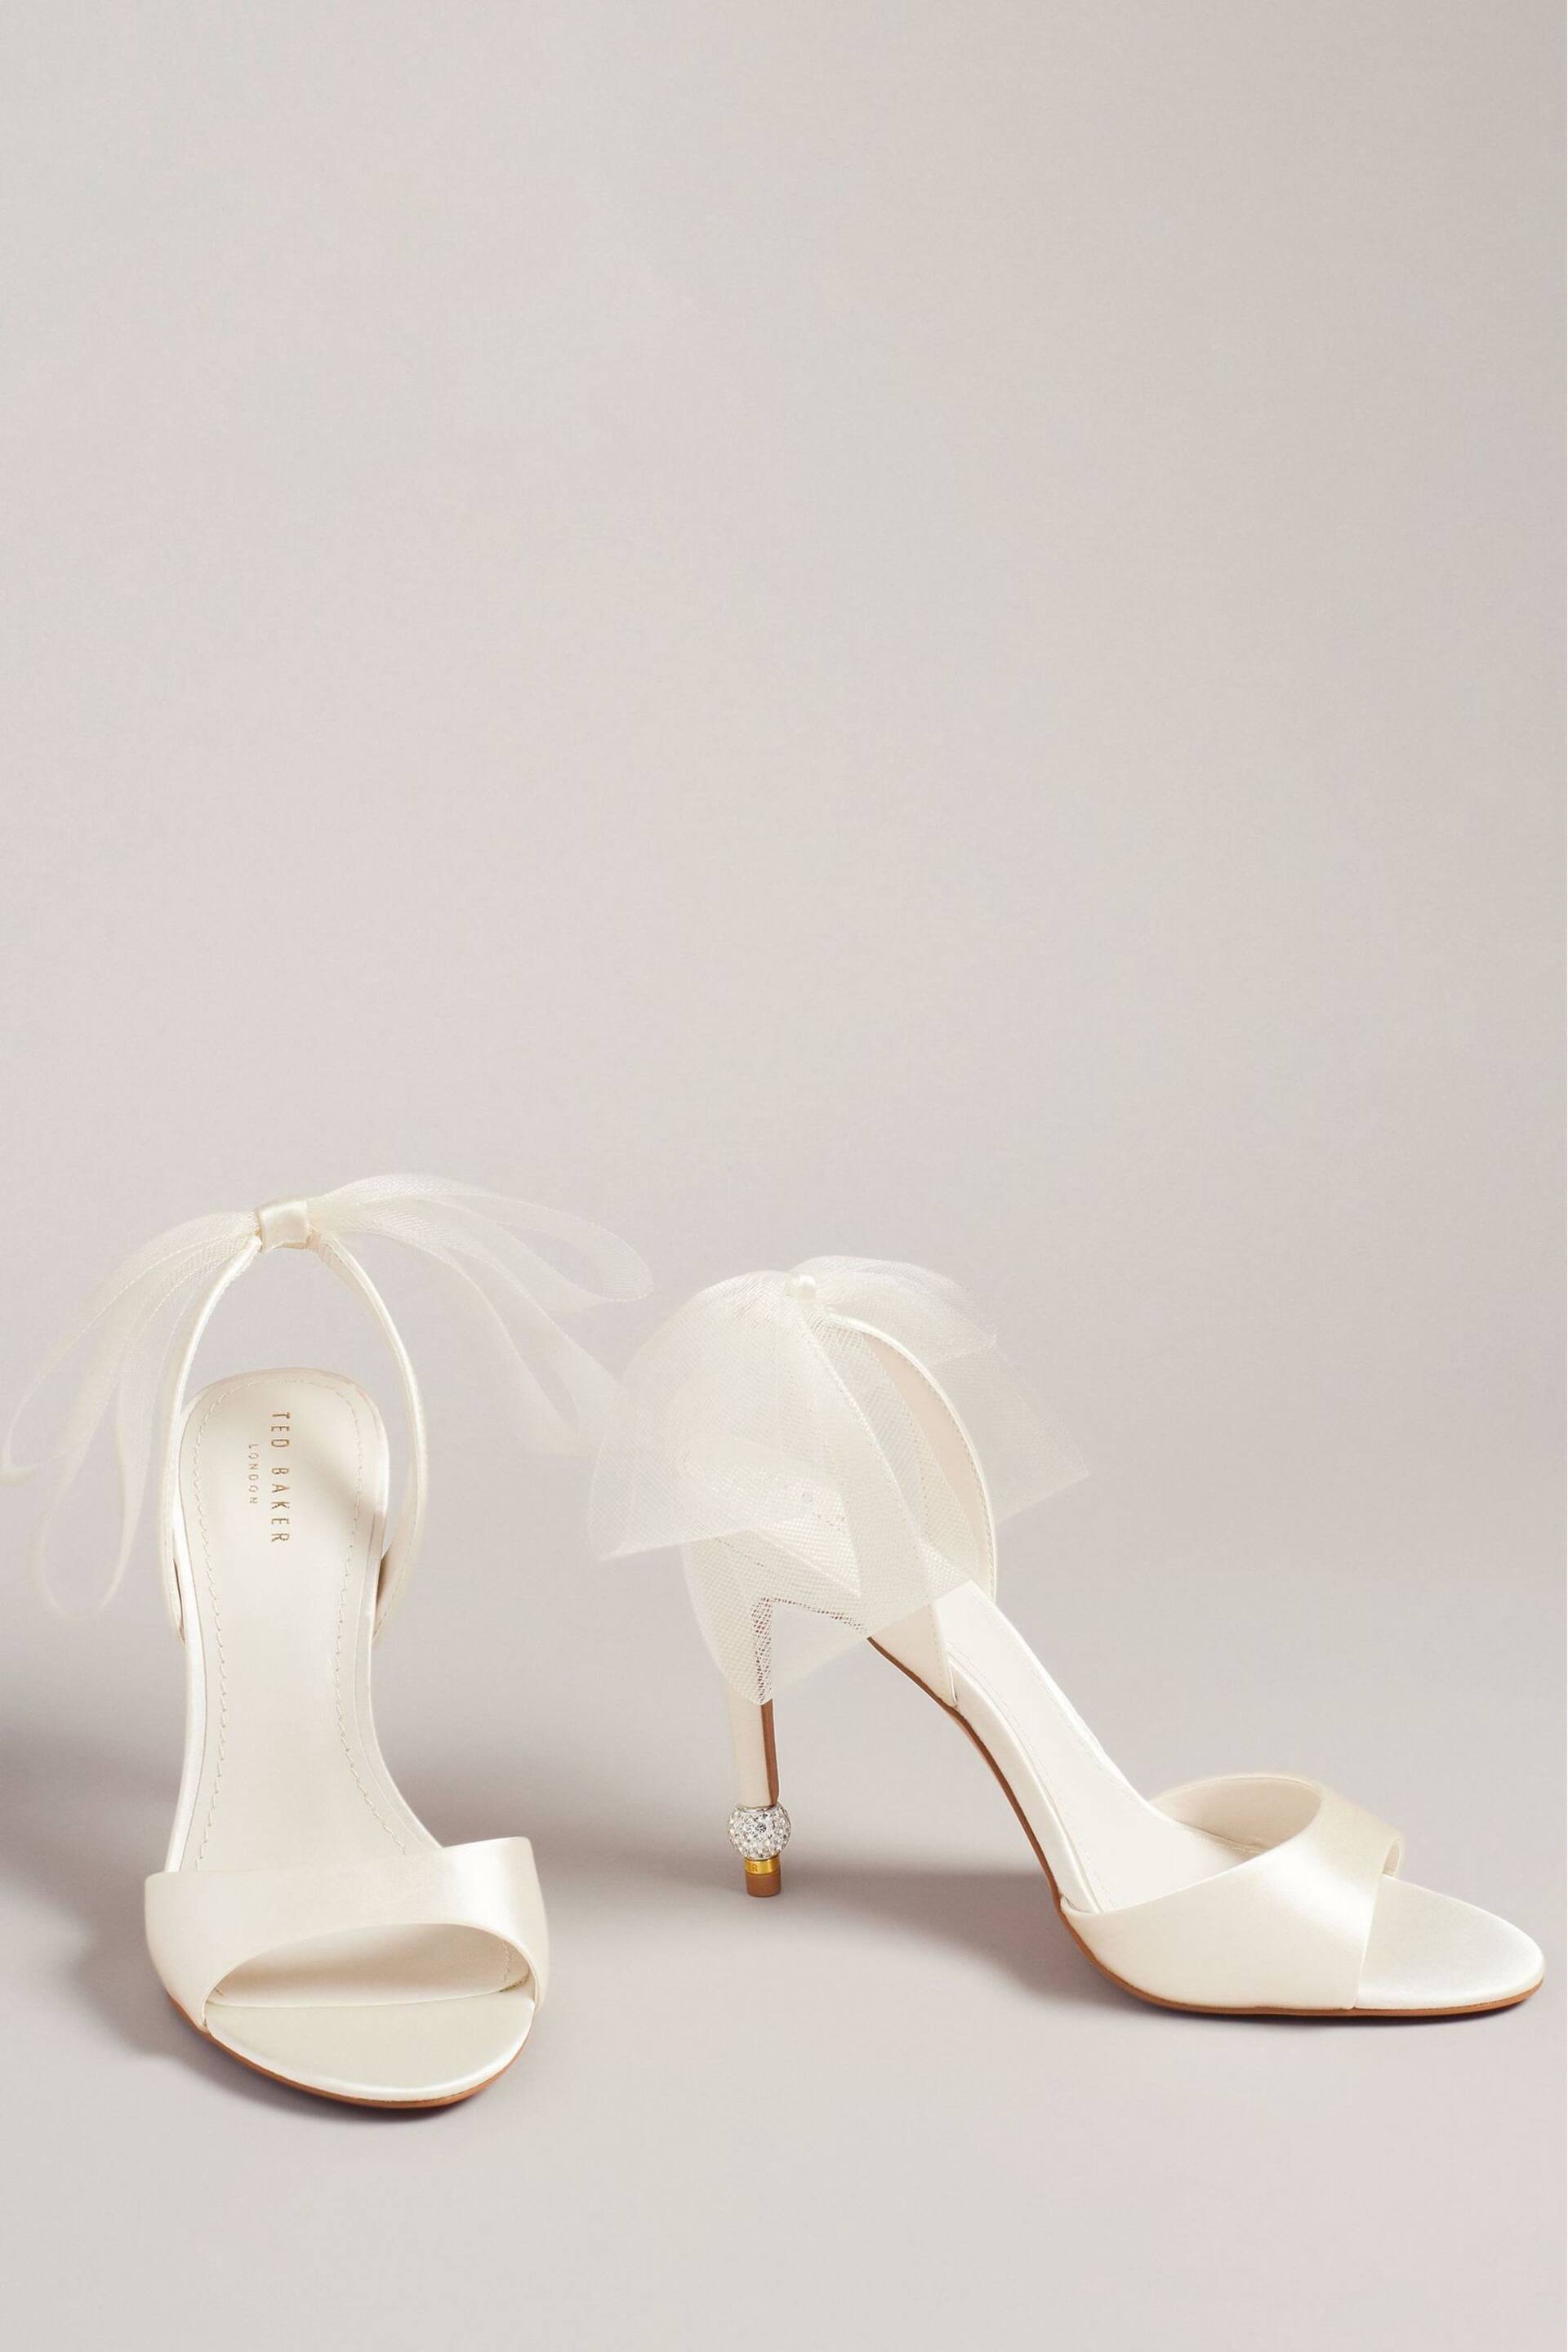 Ted Baker Natural Harinas Oversized Bow Back Sandals - Image 4 of 5